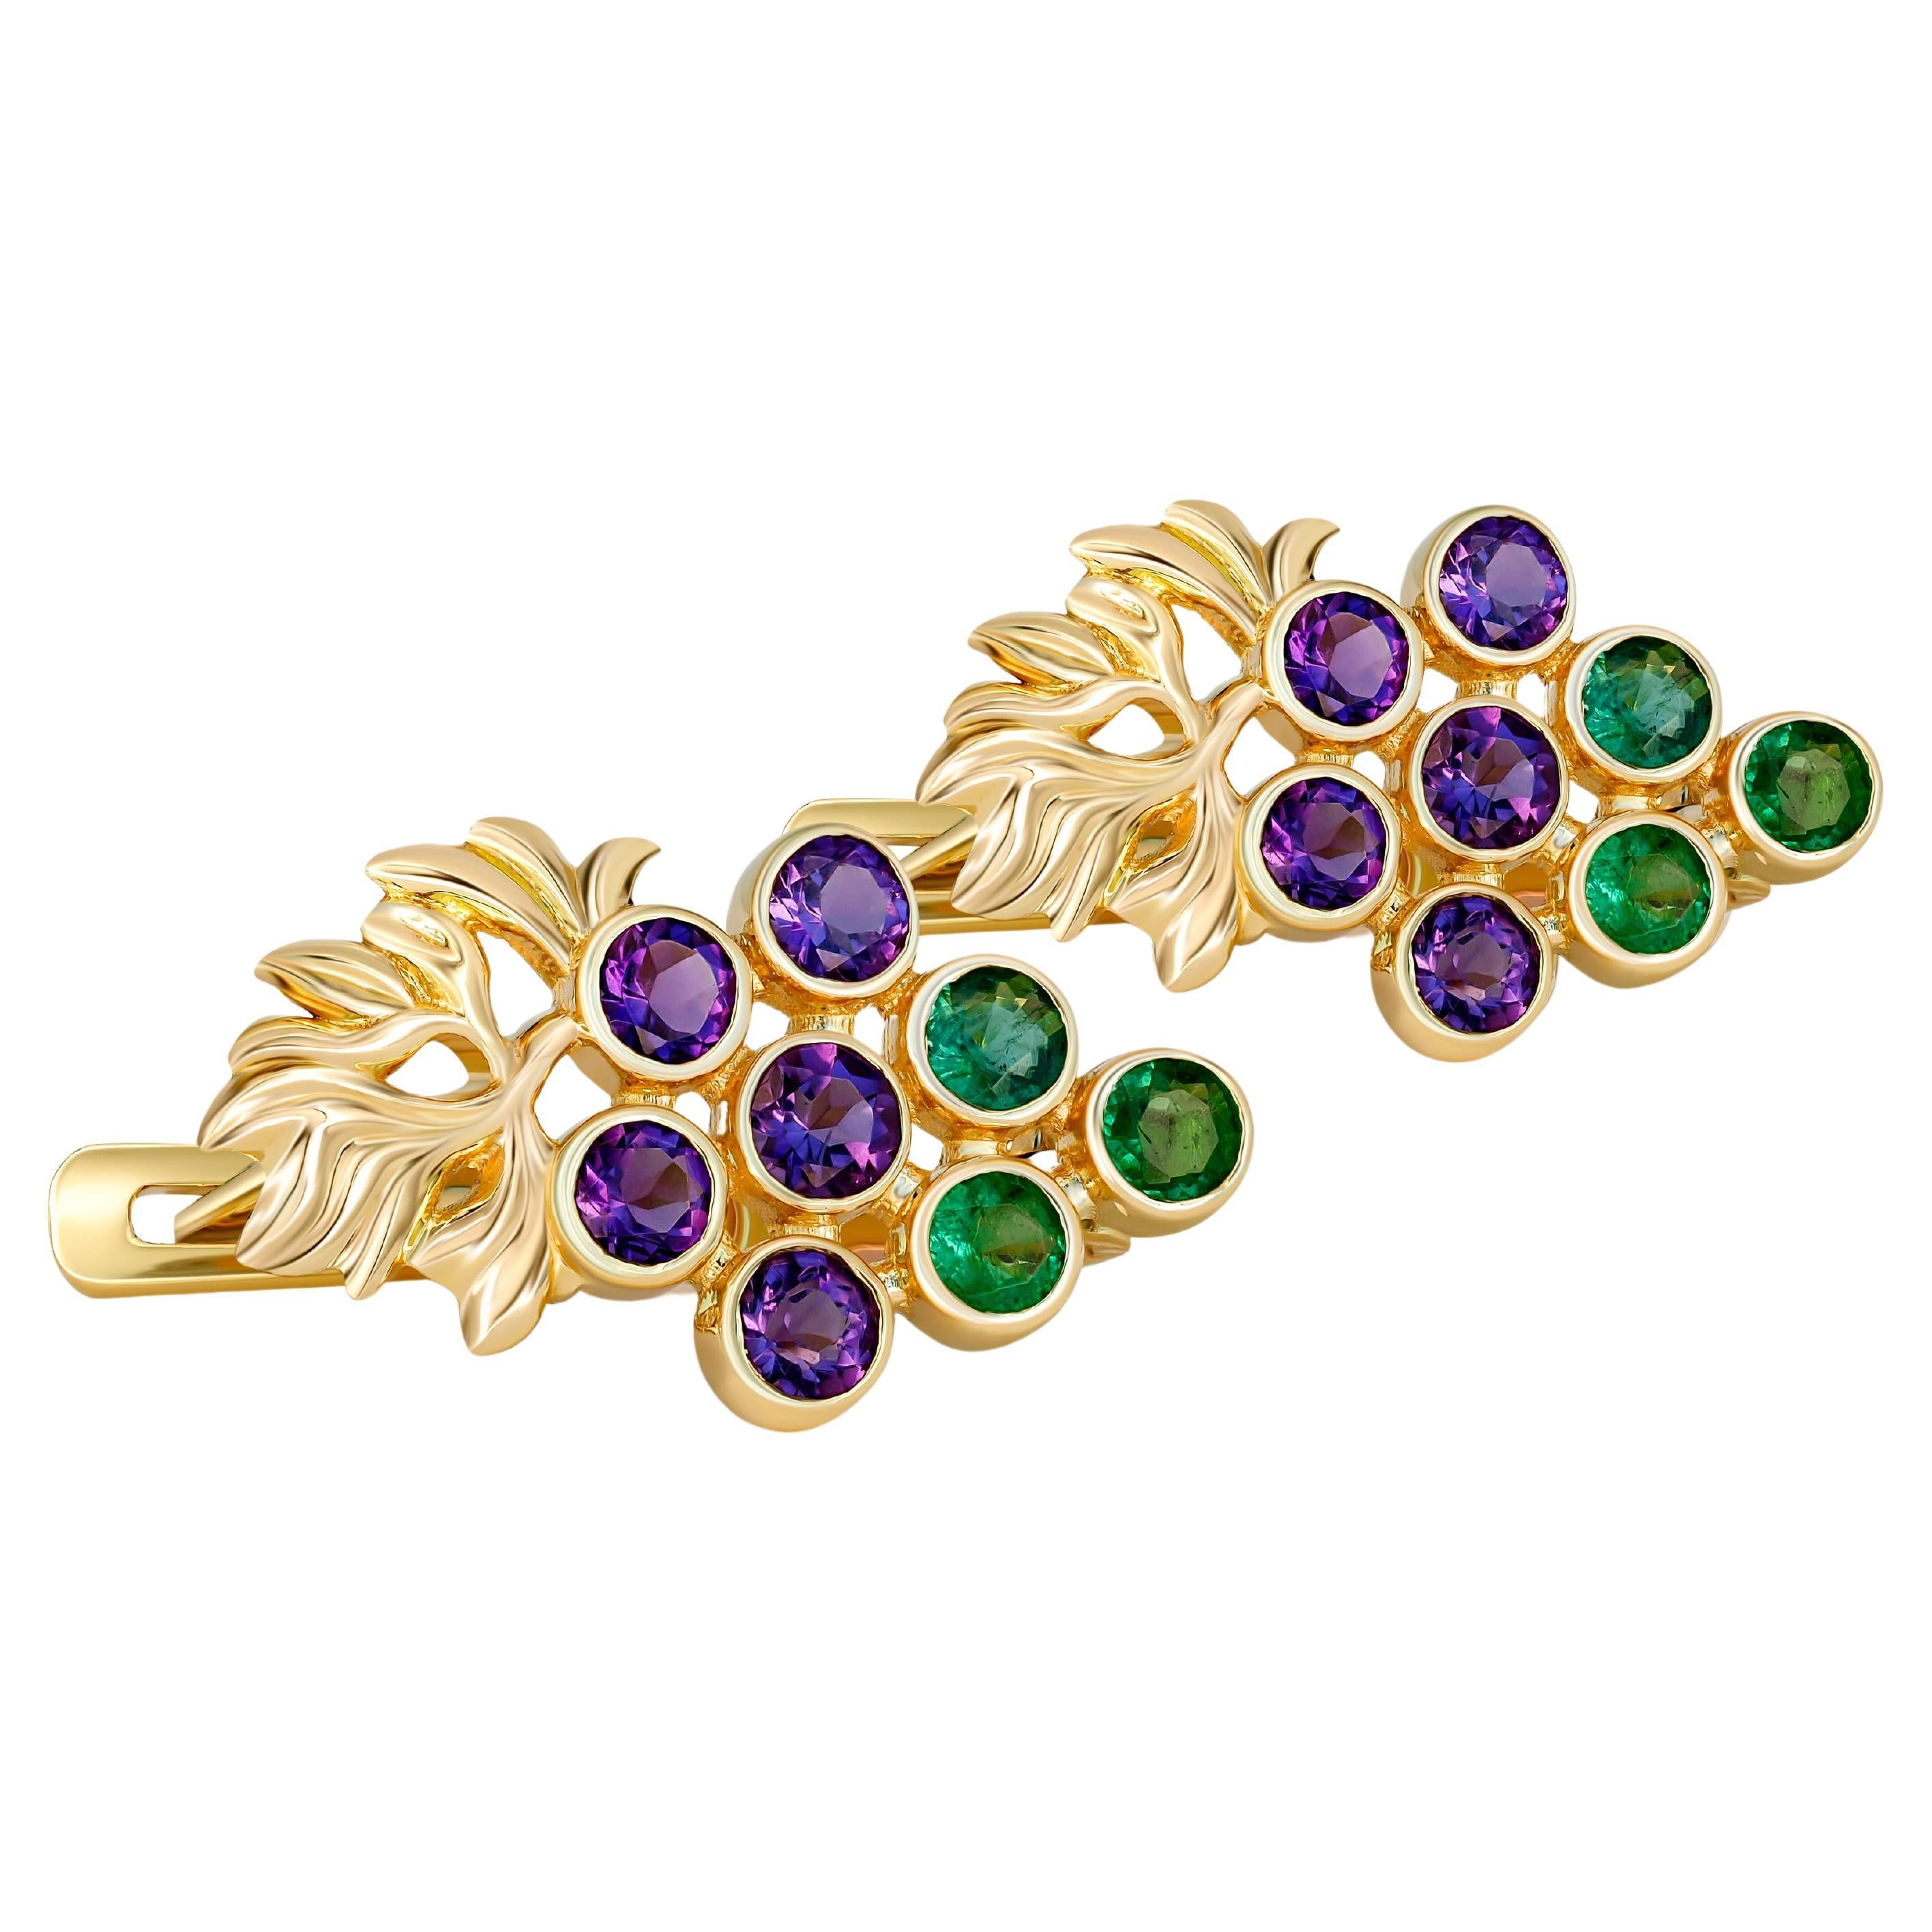 Grape Earrings with emeralds and amethysts in 14k gold.  For Sale